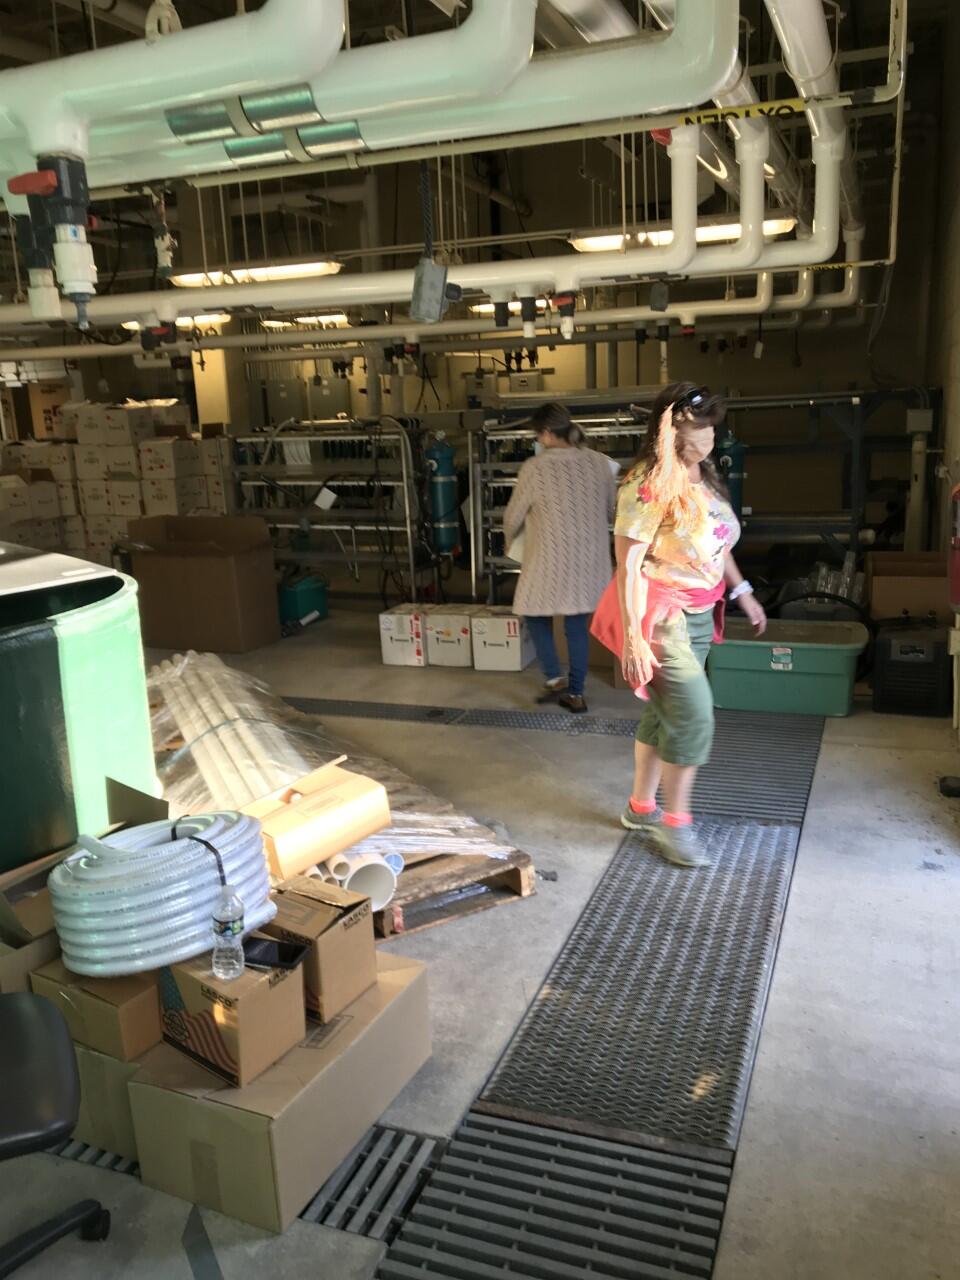 Two women carry boxes in a large warehouse room.